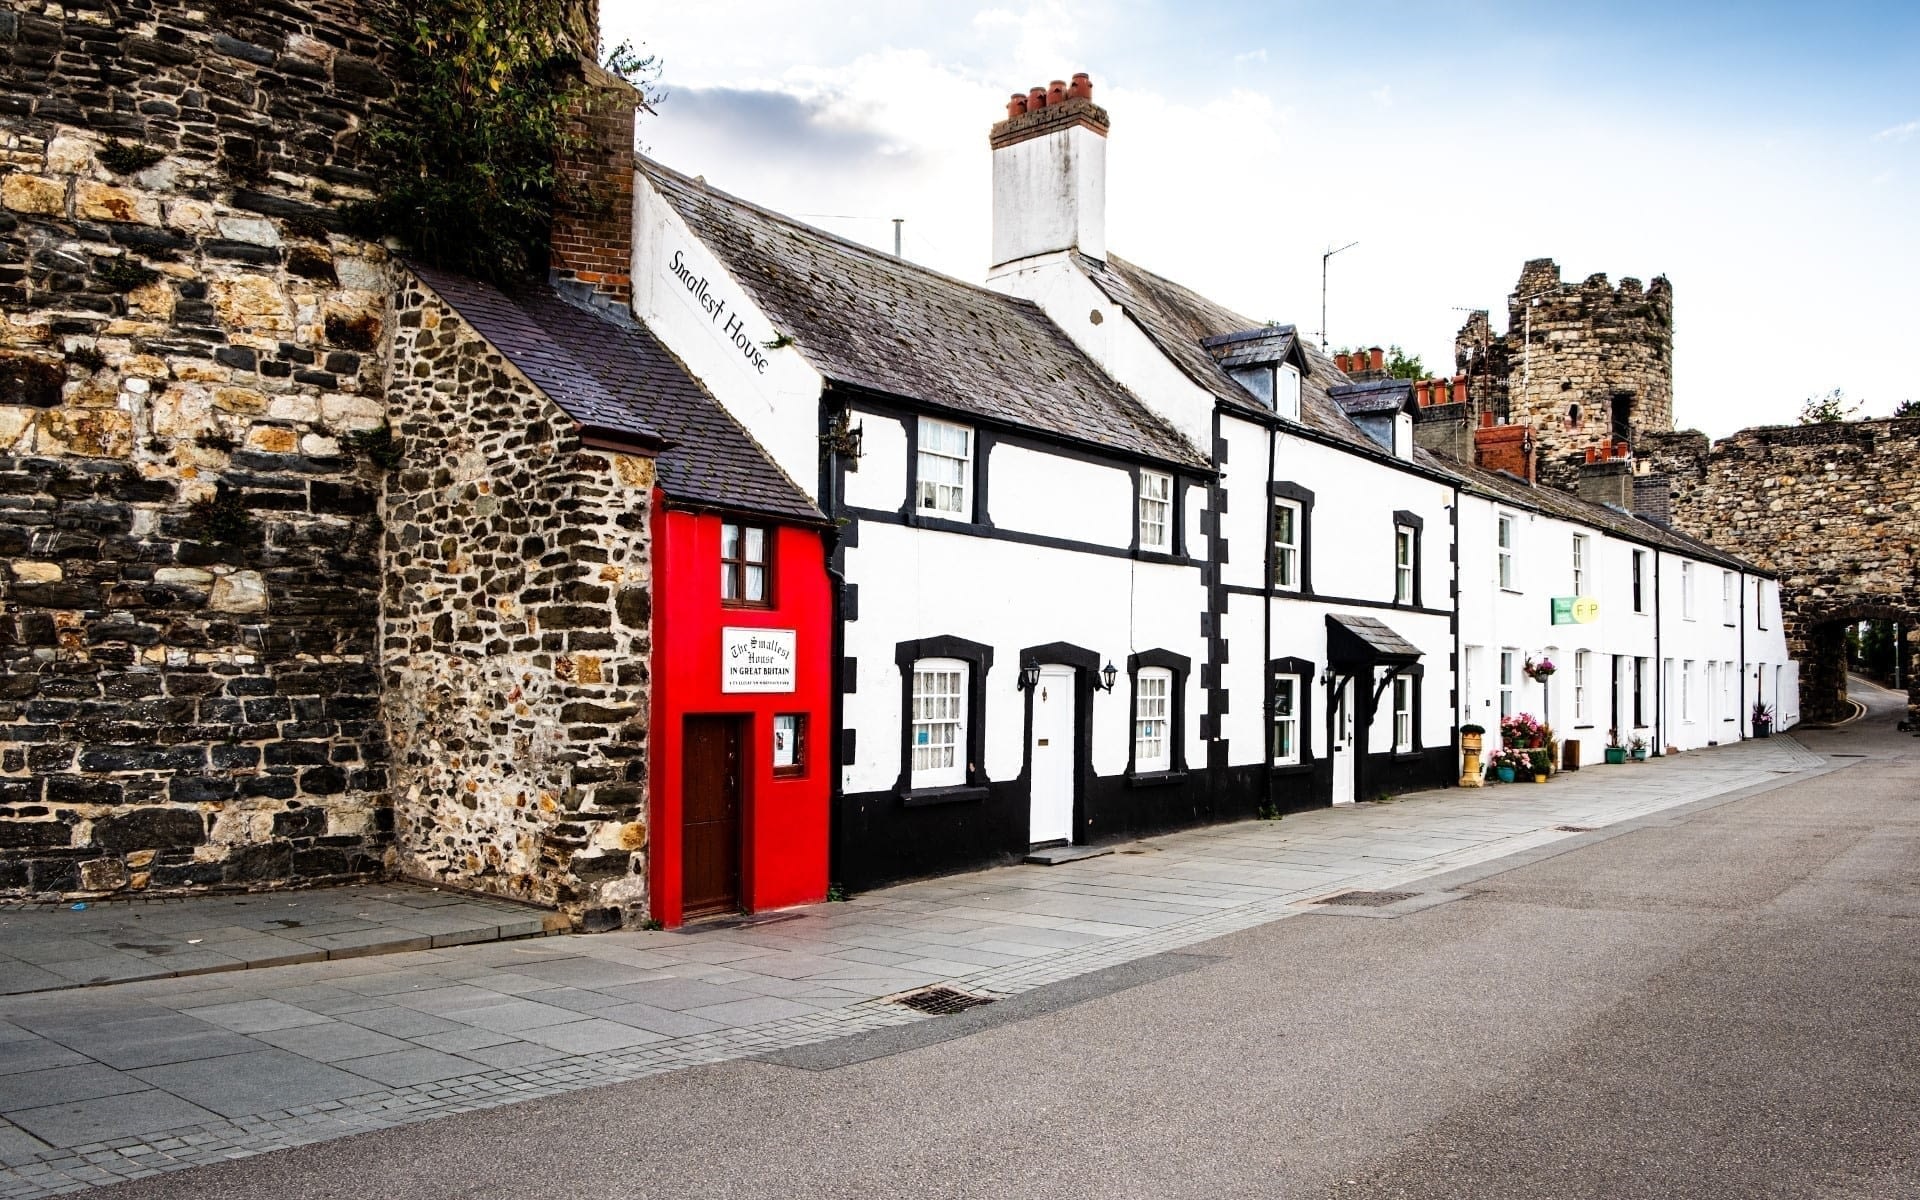 Quay House – the smallest house in Great Britain